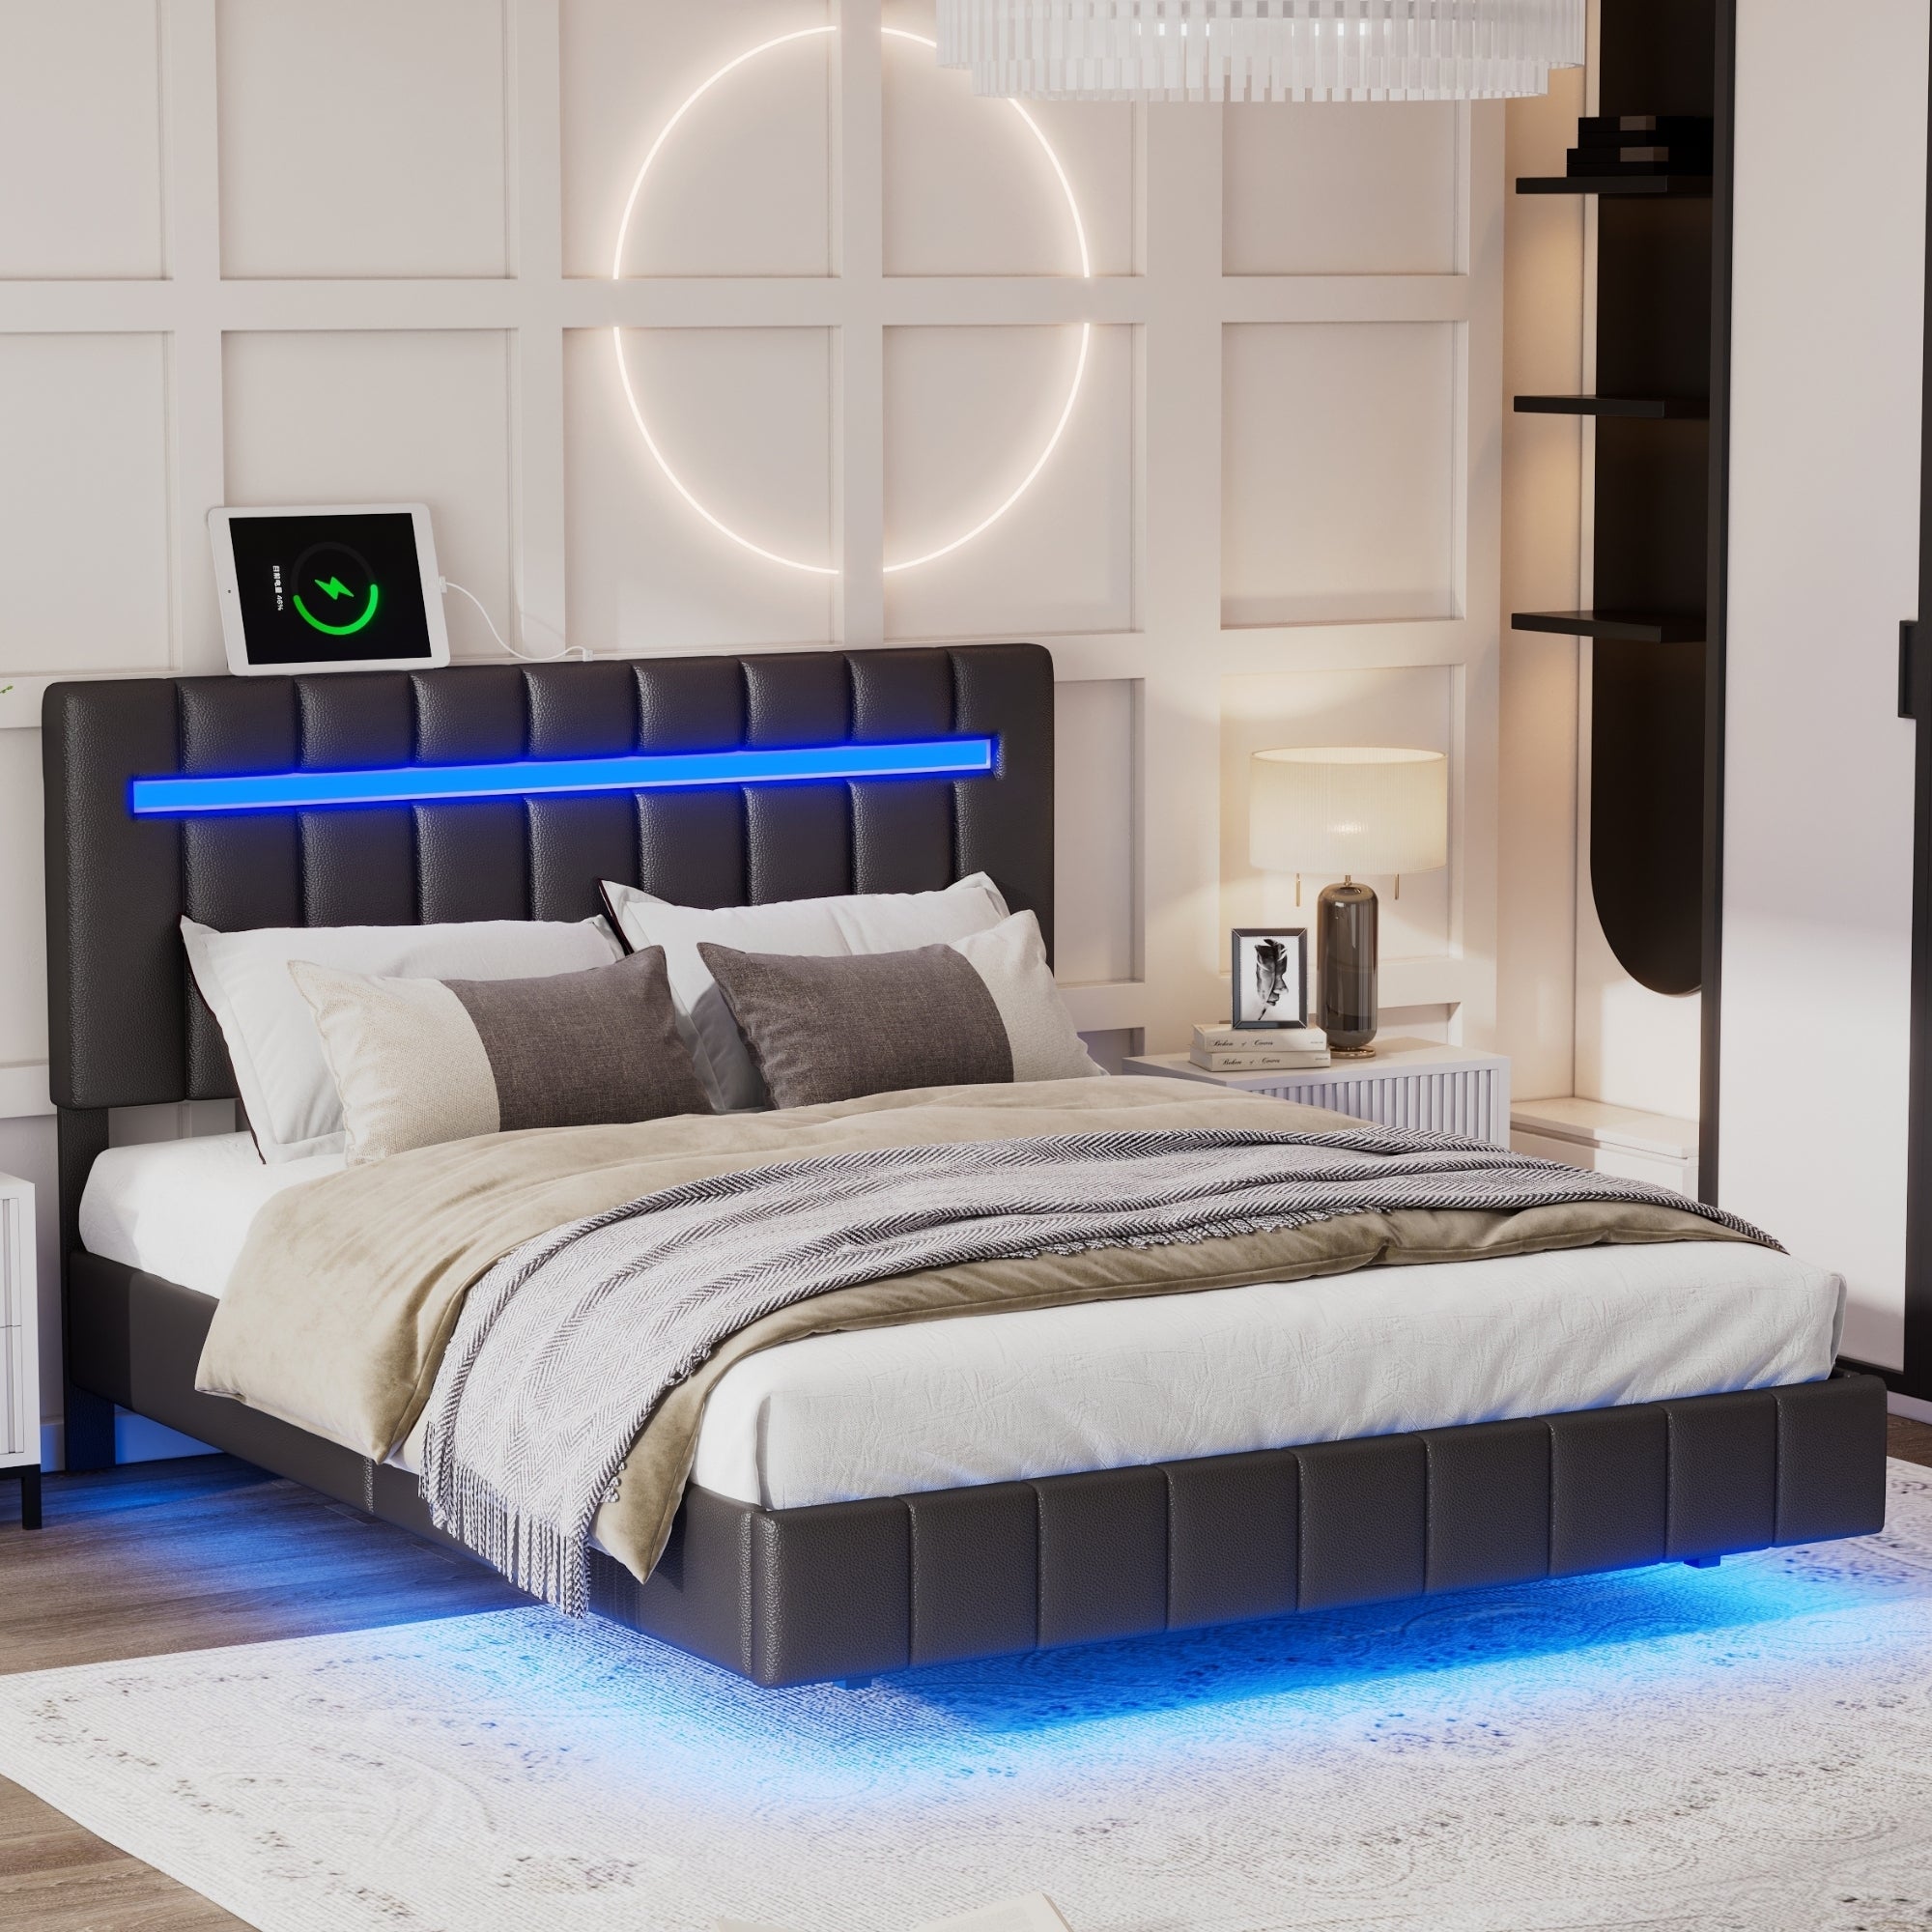 Lazio Full Size black Faux Leather Floating Platform Bed with LED Lights and USB Charging